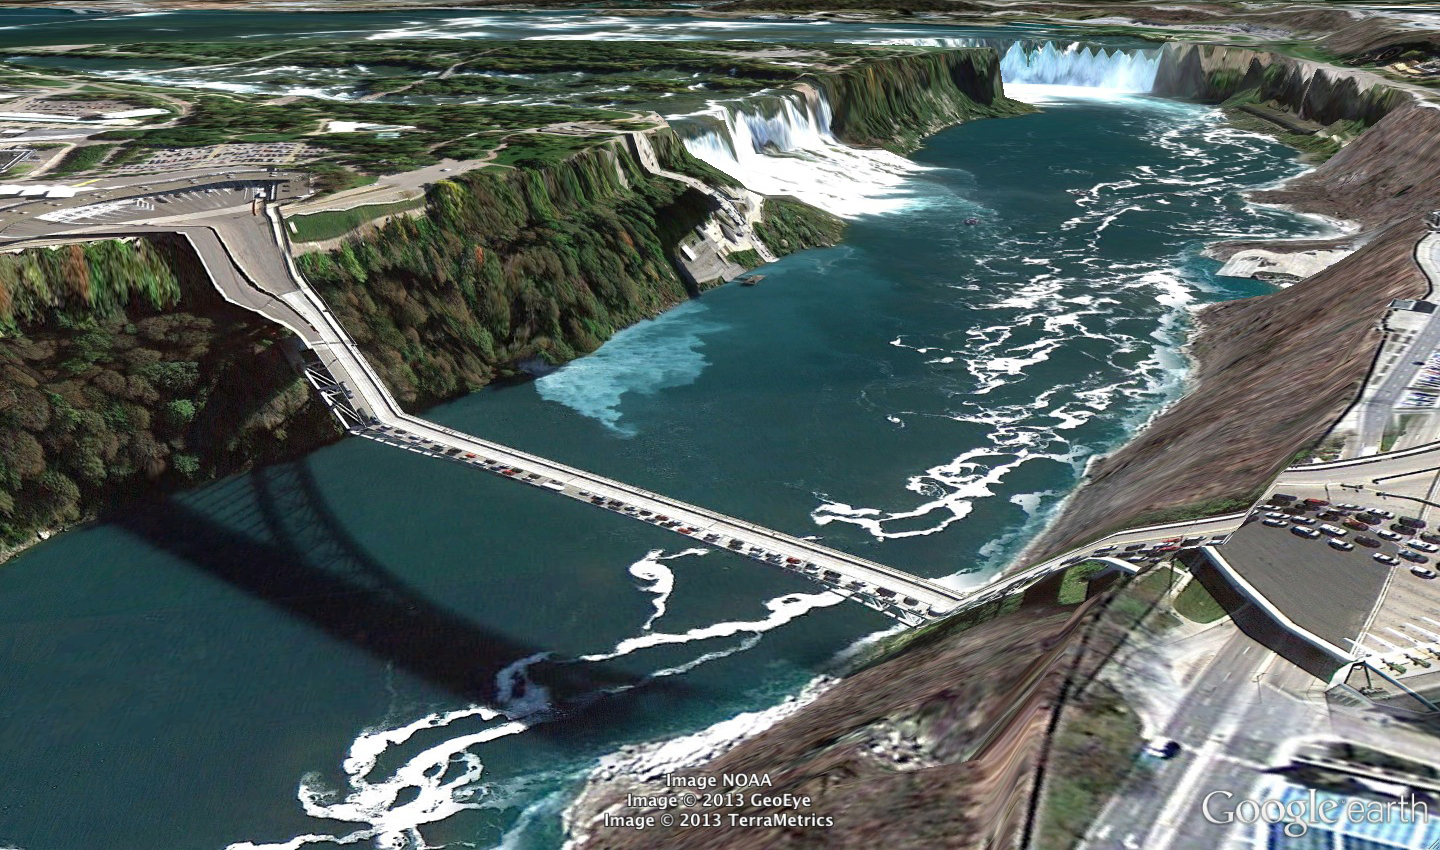 Postcard from Google Earth (43°5'22.07"N, 79° 4'5.97"W) Clement Valla